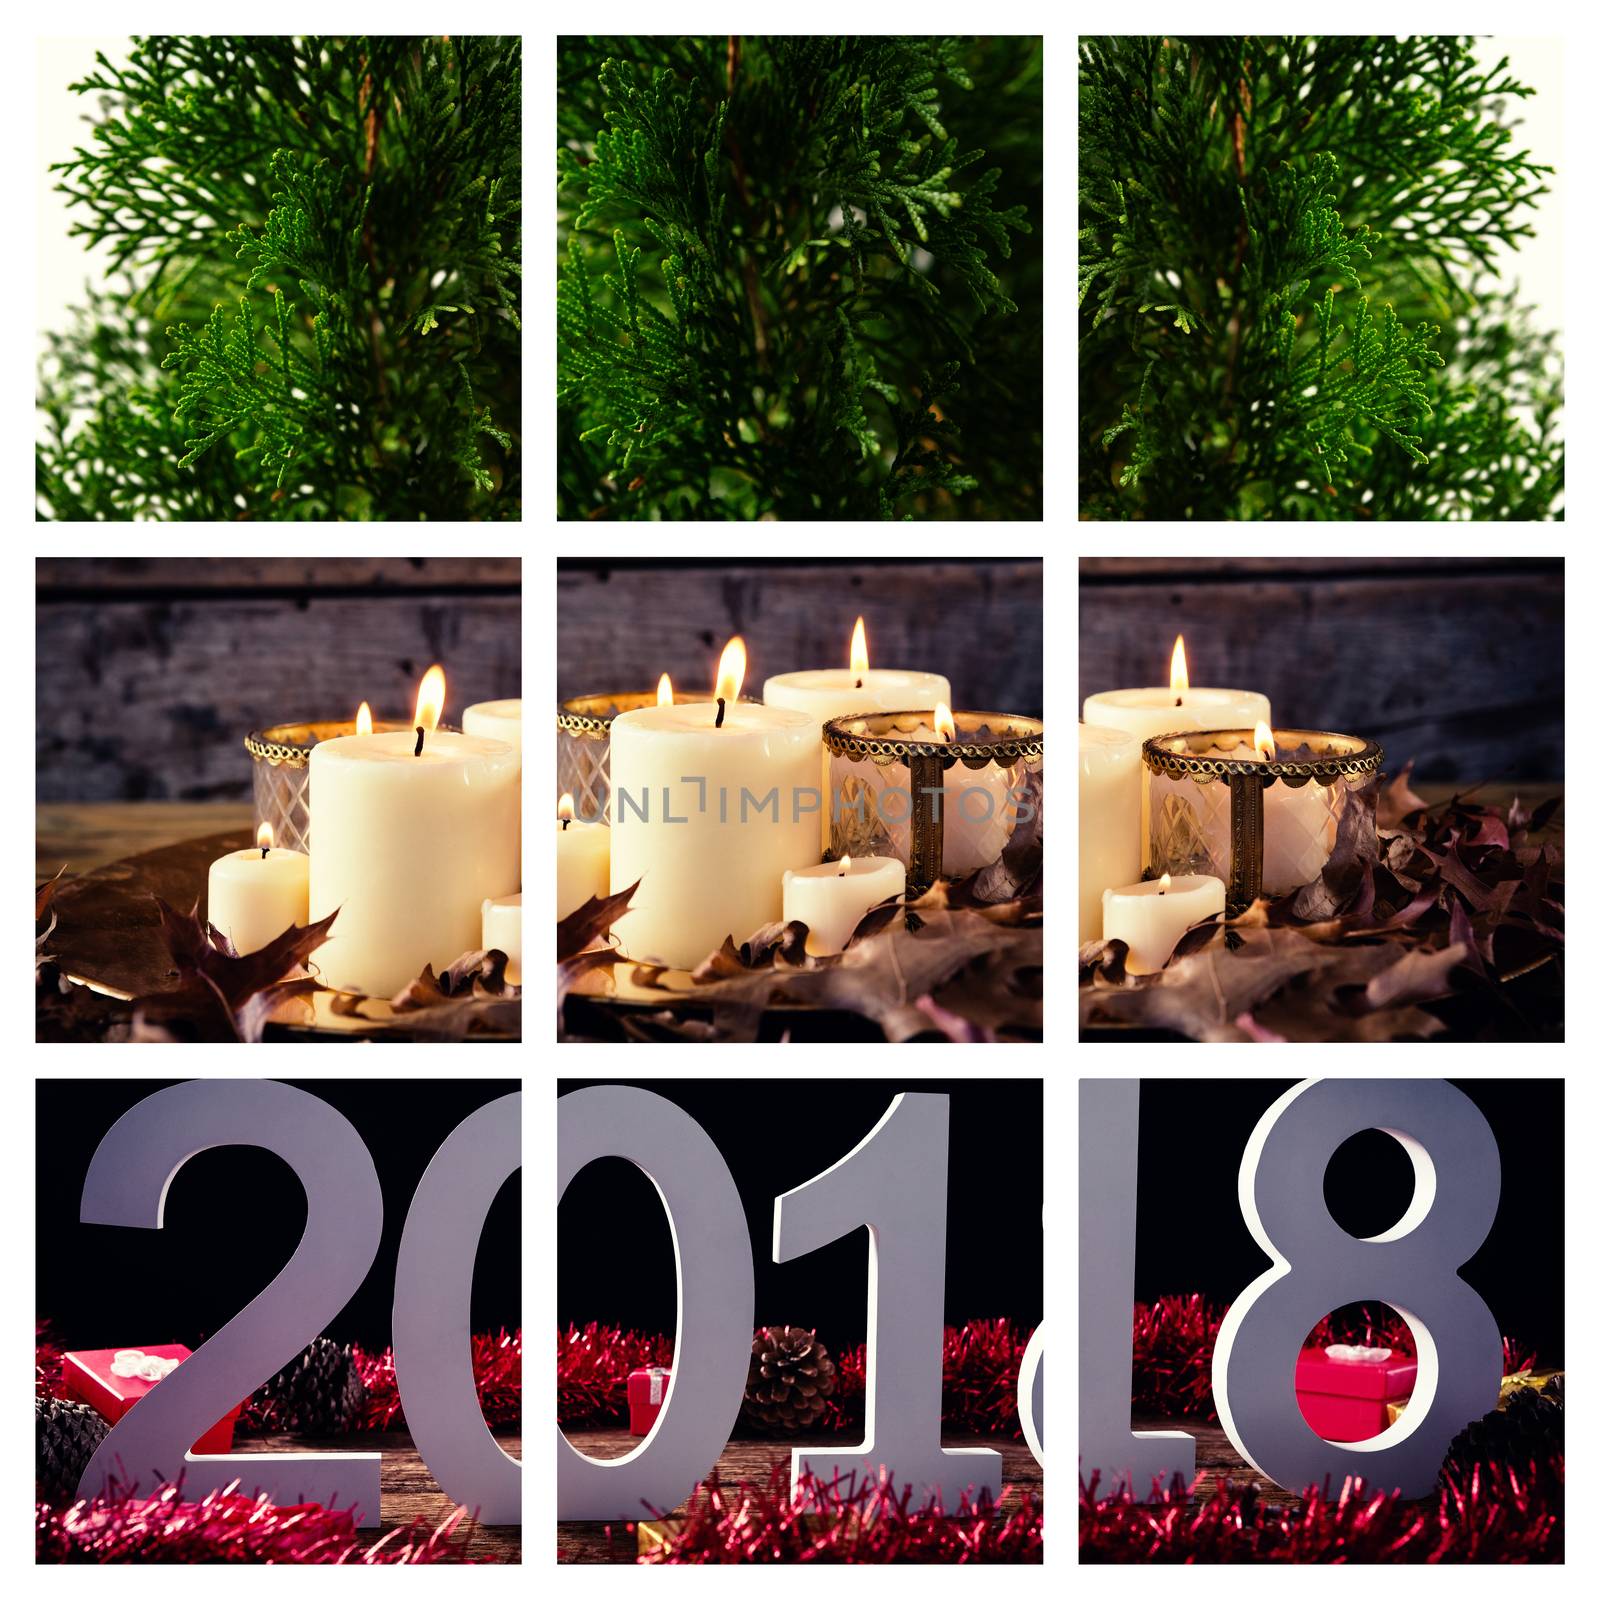 Christmas and new year collage